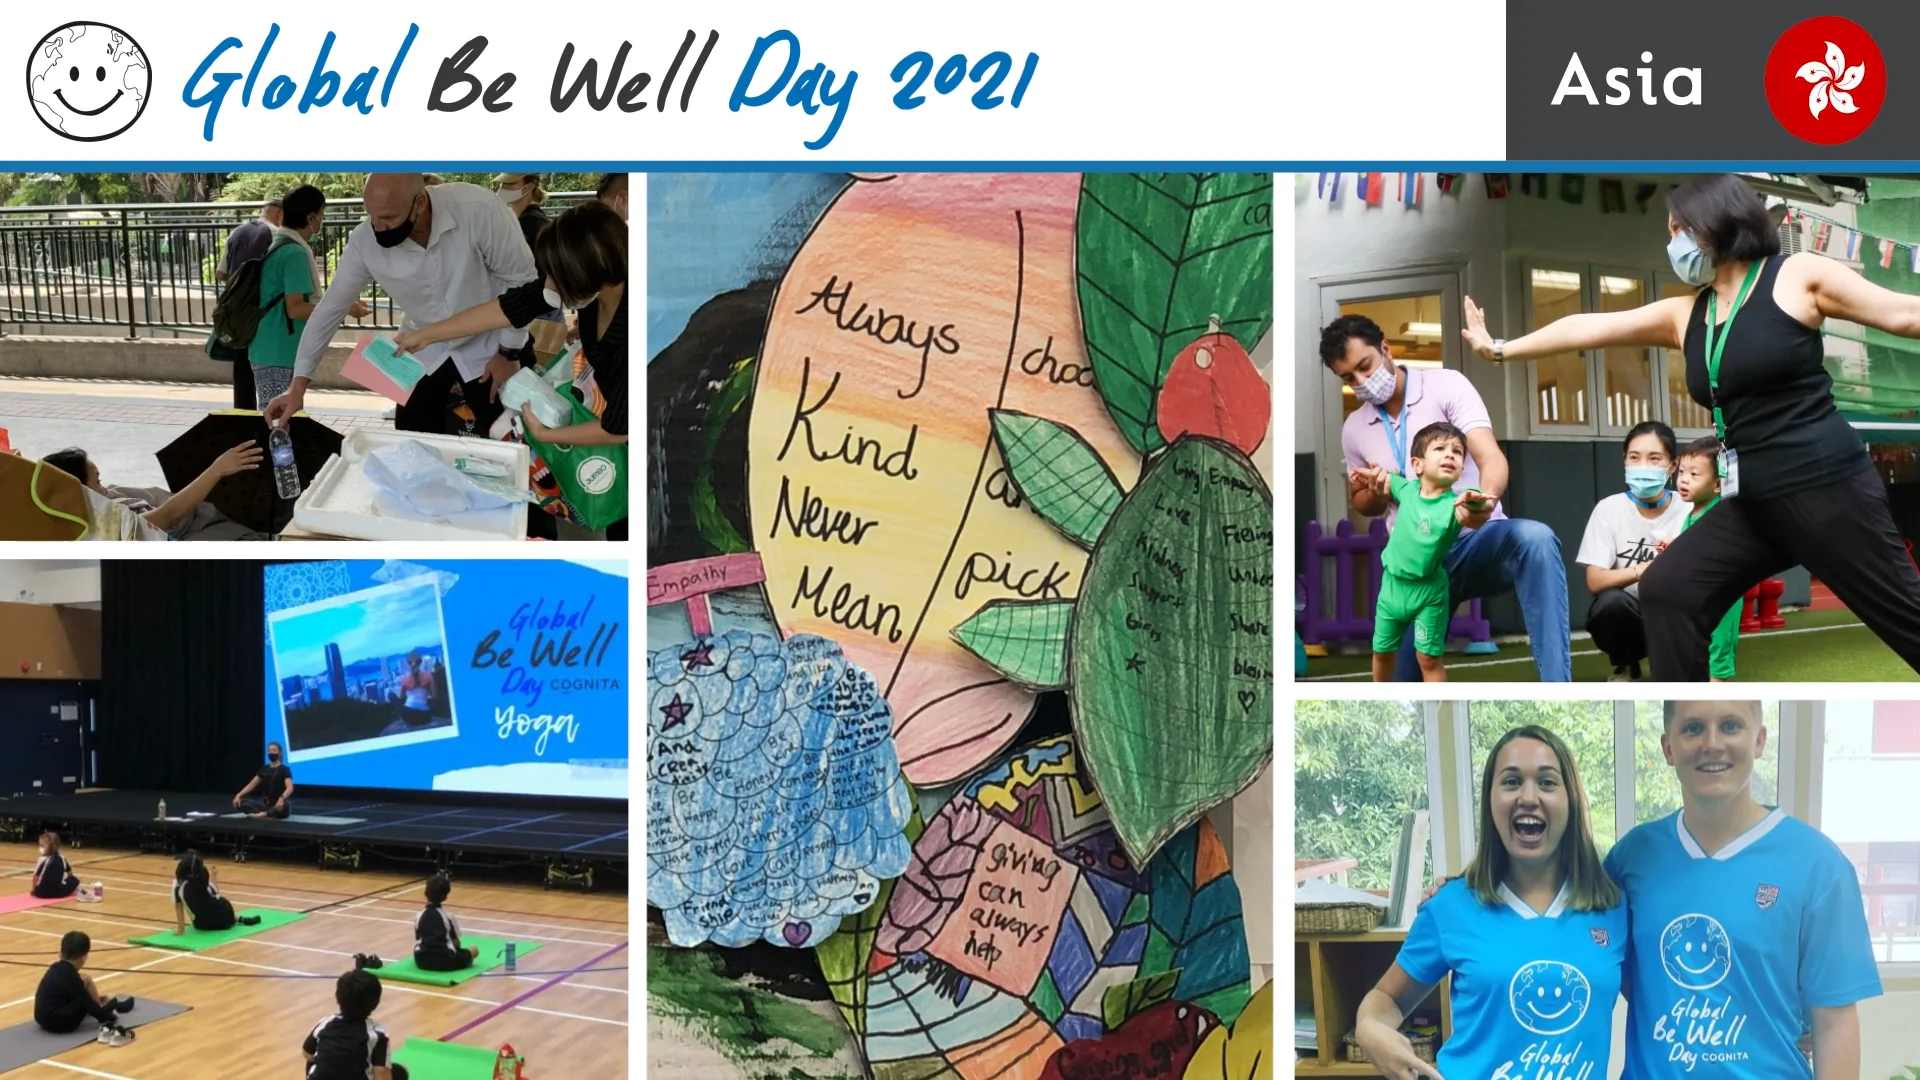 Global Be Well Day 2021 highlights on Vimeo